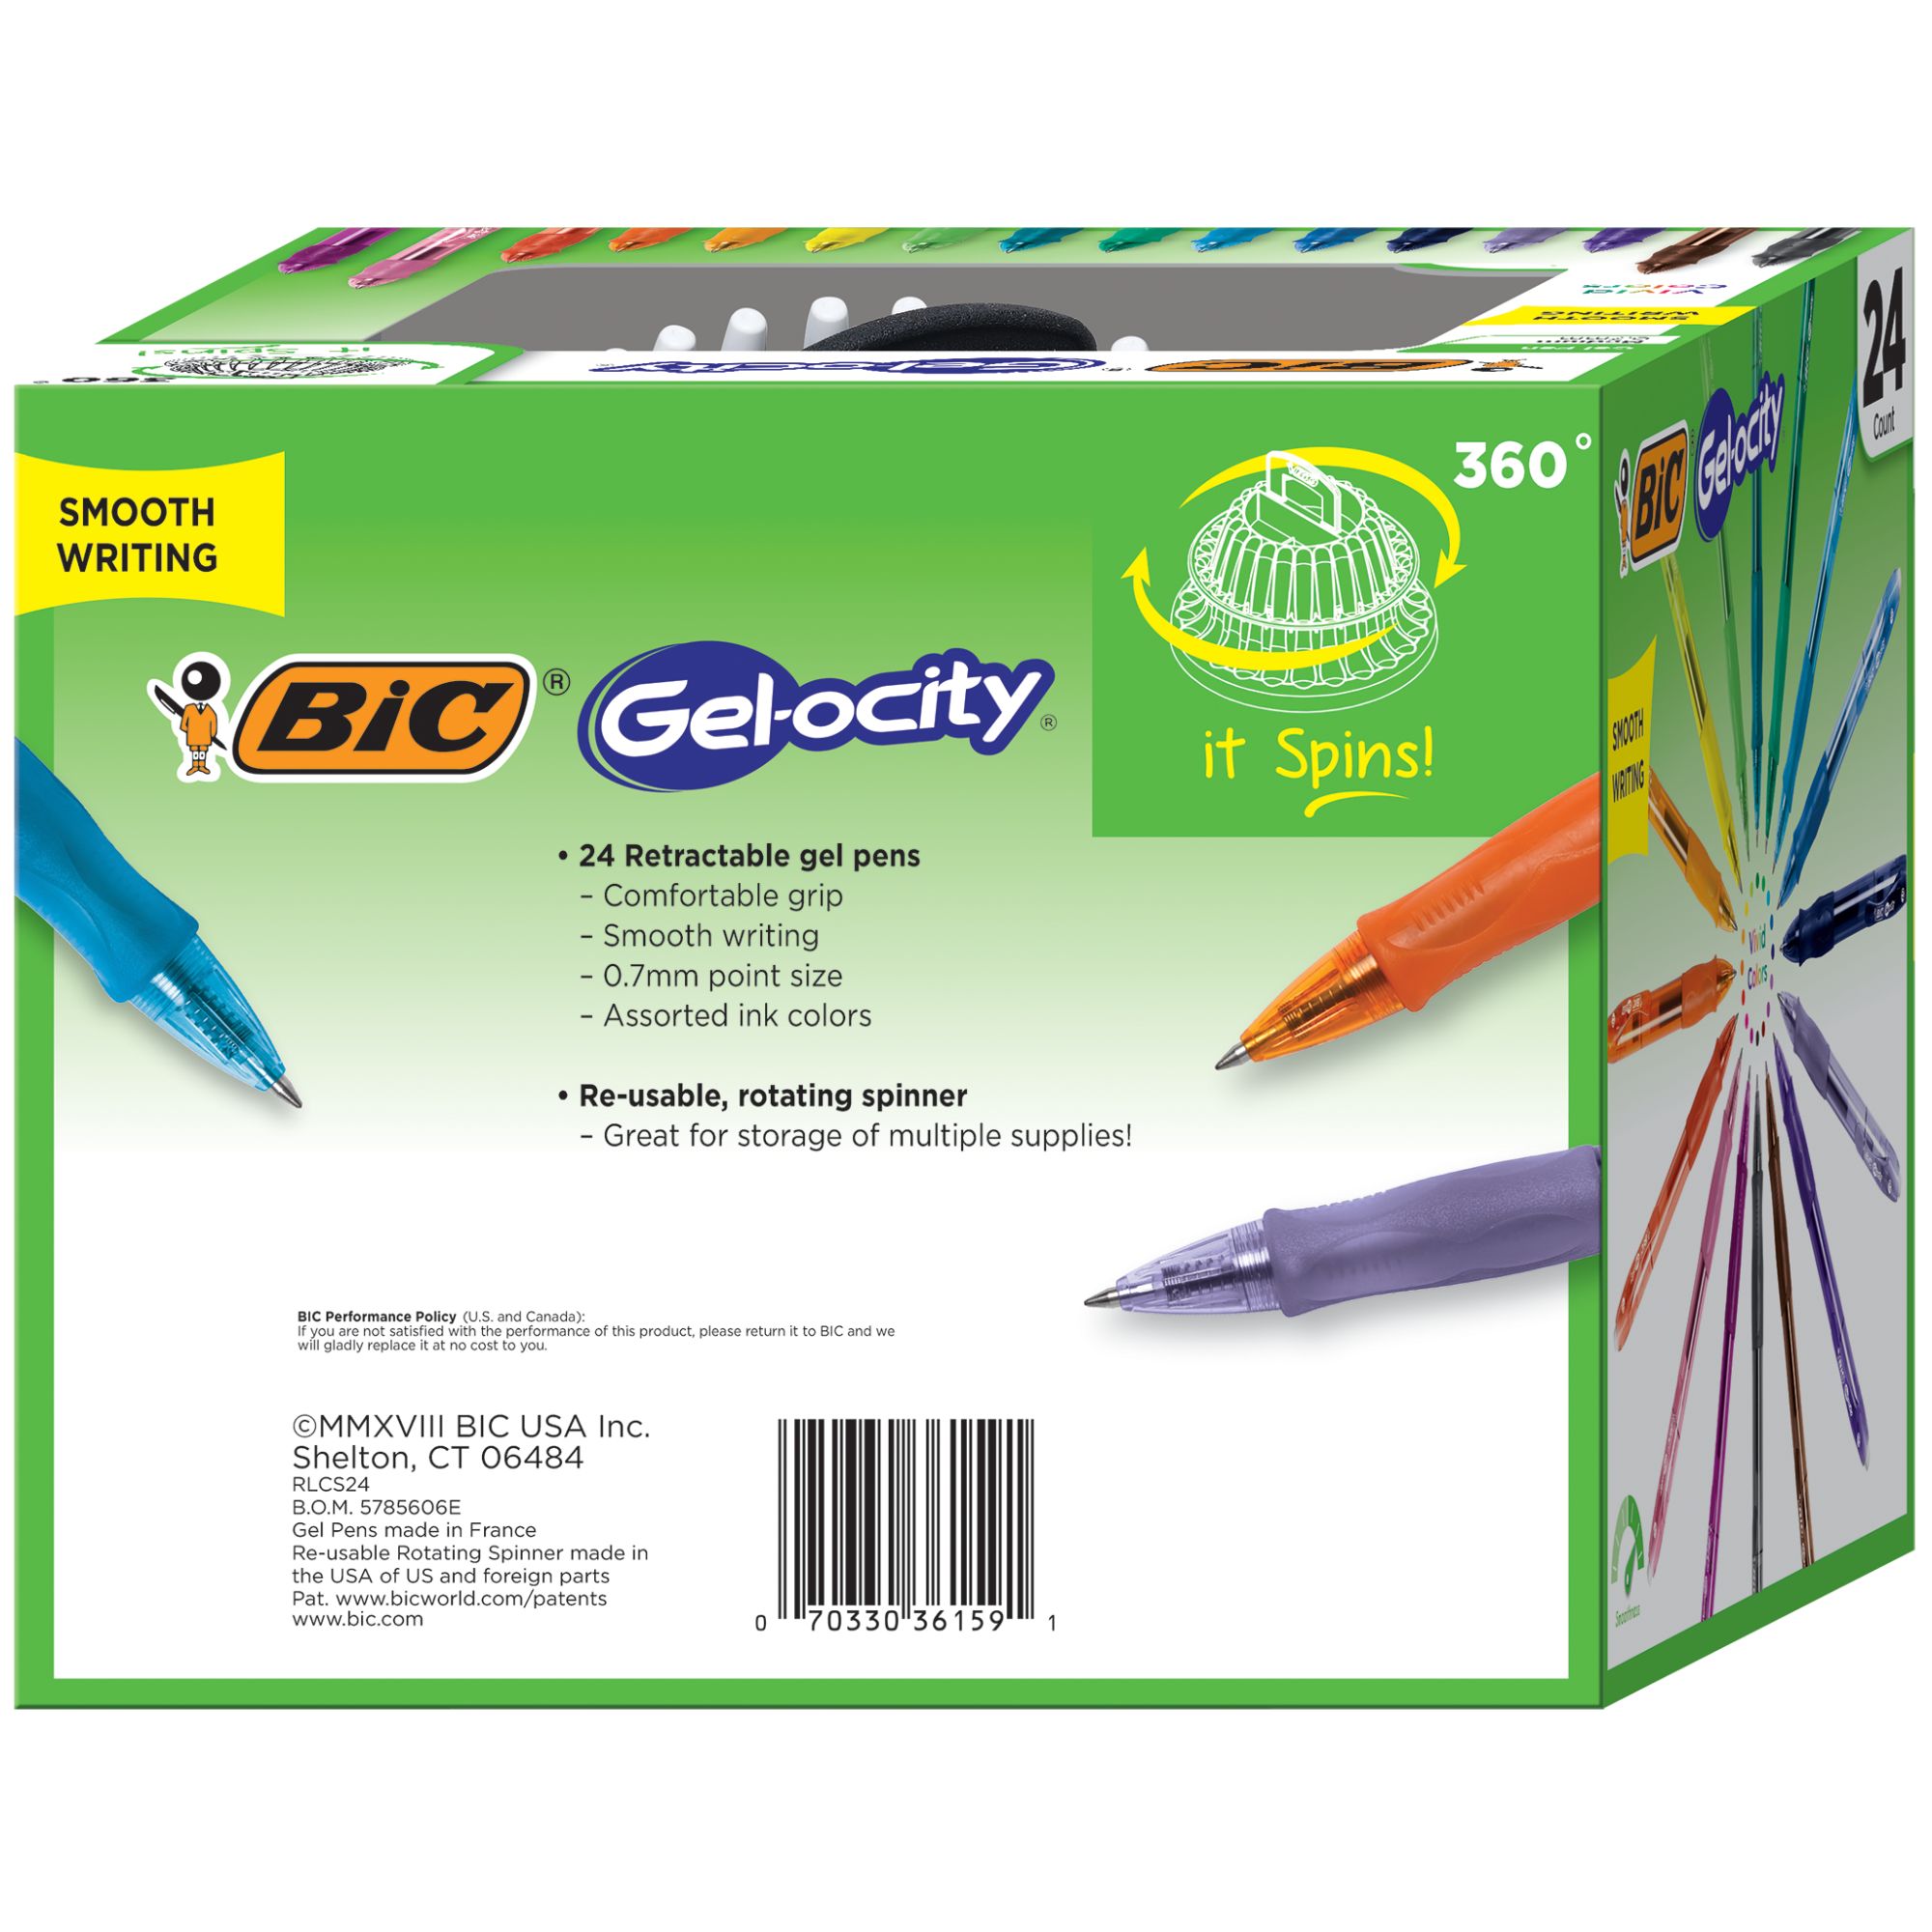 BIC Gel-ocity Original Retractable Gel Pen Spinner, Assorted Colors, 24-Count, Convenient Storage Spinner Rotates 360 Degrees - image 3 of 9